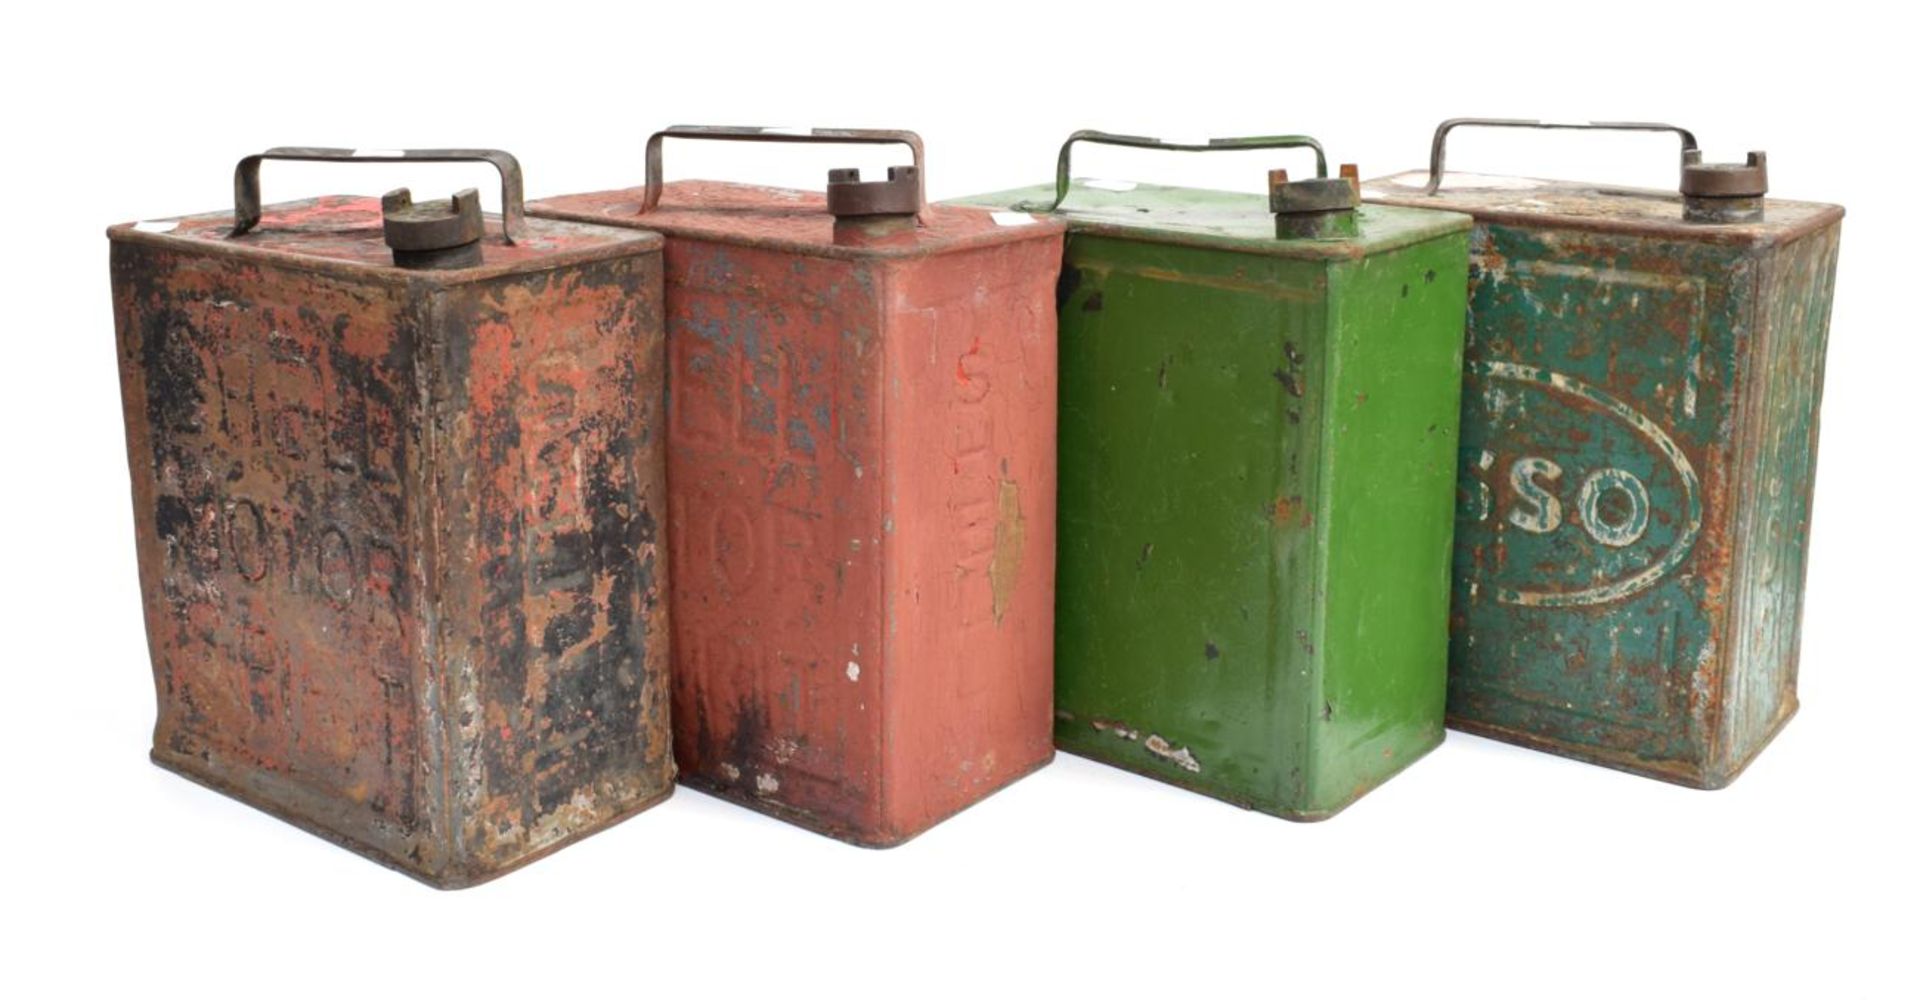 Four Vintage 2 Gallon Petrol Cans, comprising two Shell Motor Spirit, a green Esso, and an